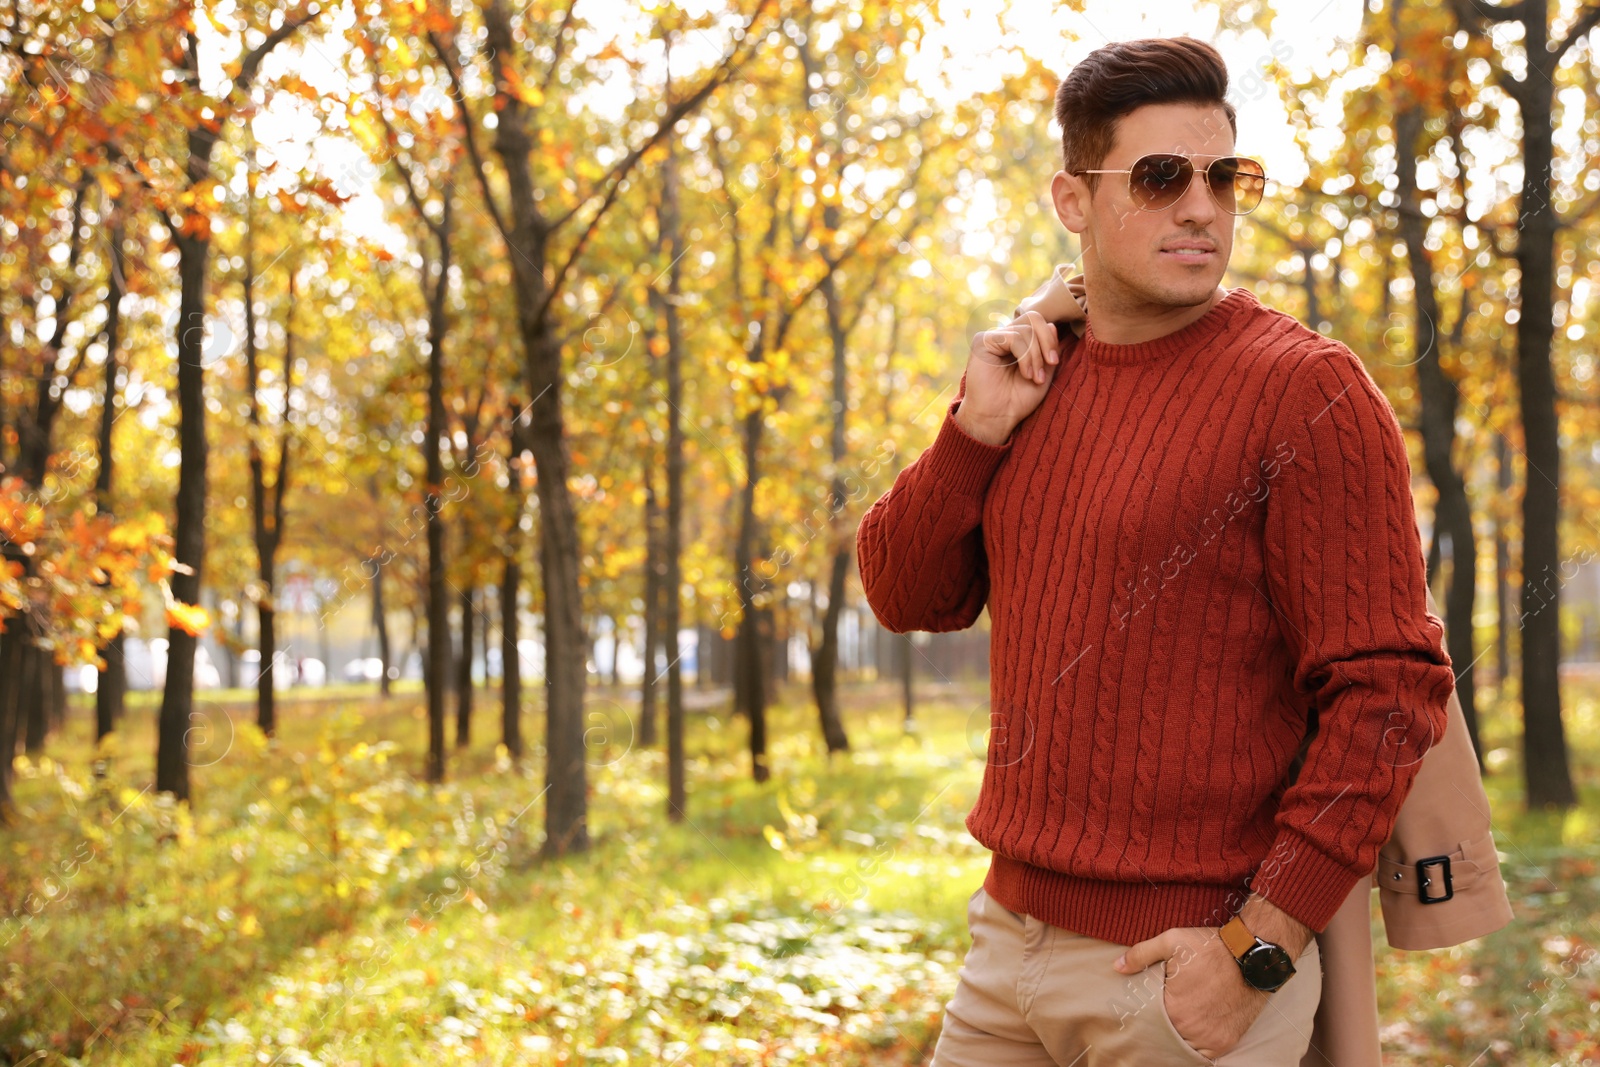 Photo of Handsome man walking in park on autumn day